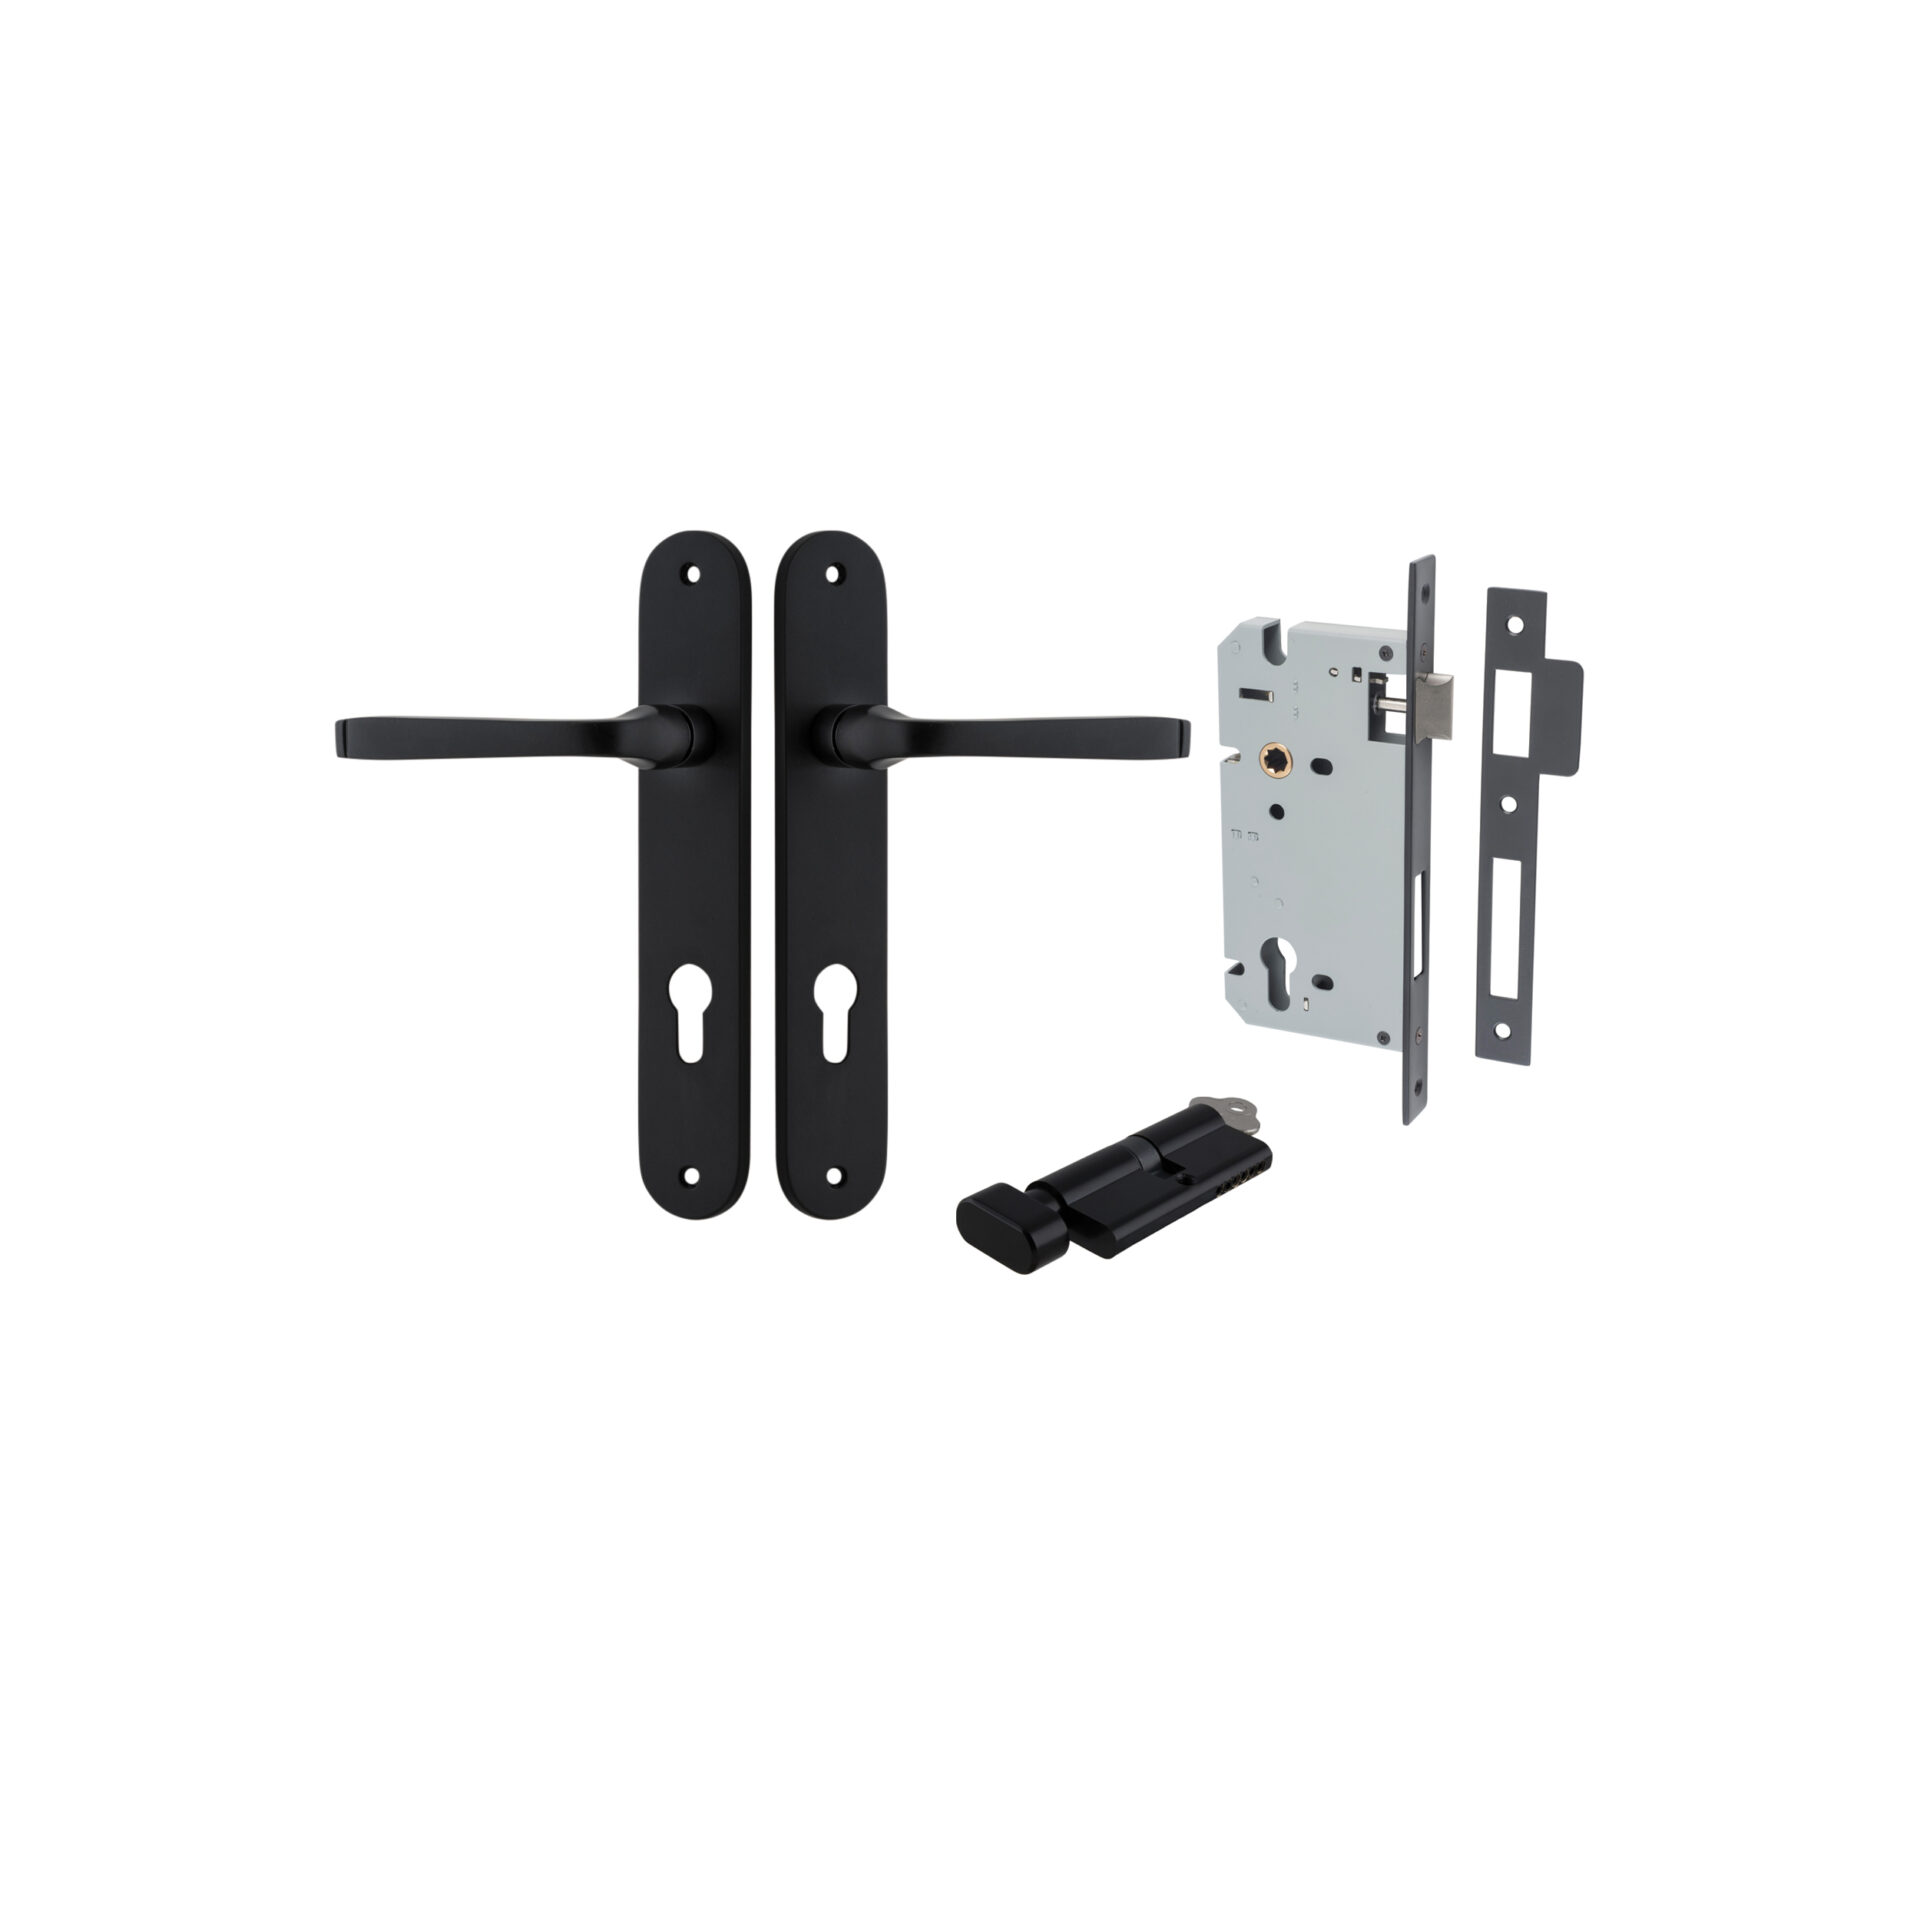 Annecy Lever - Oval Backplate Entrance Kit with High Security Lock